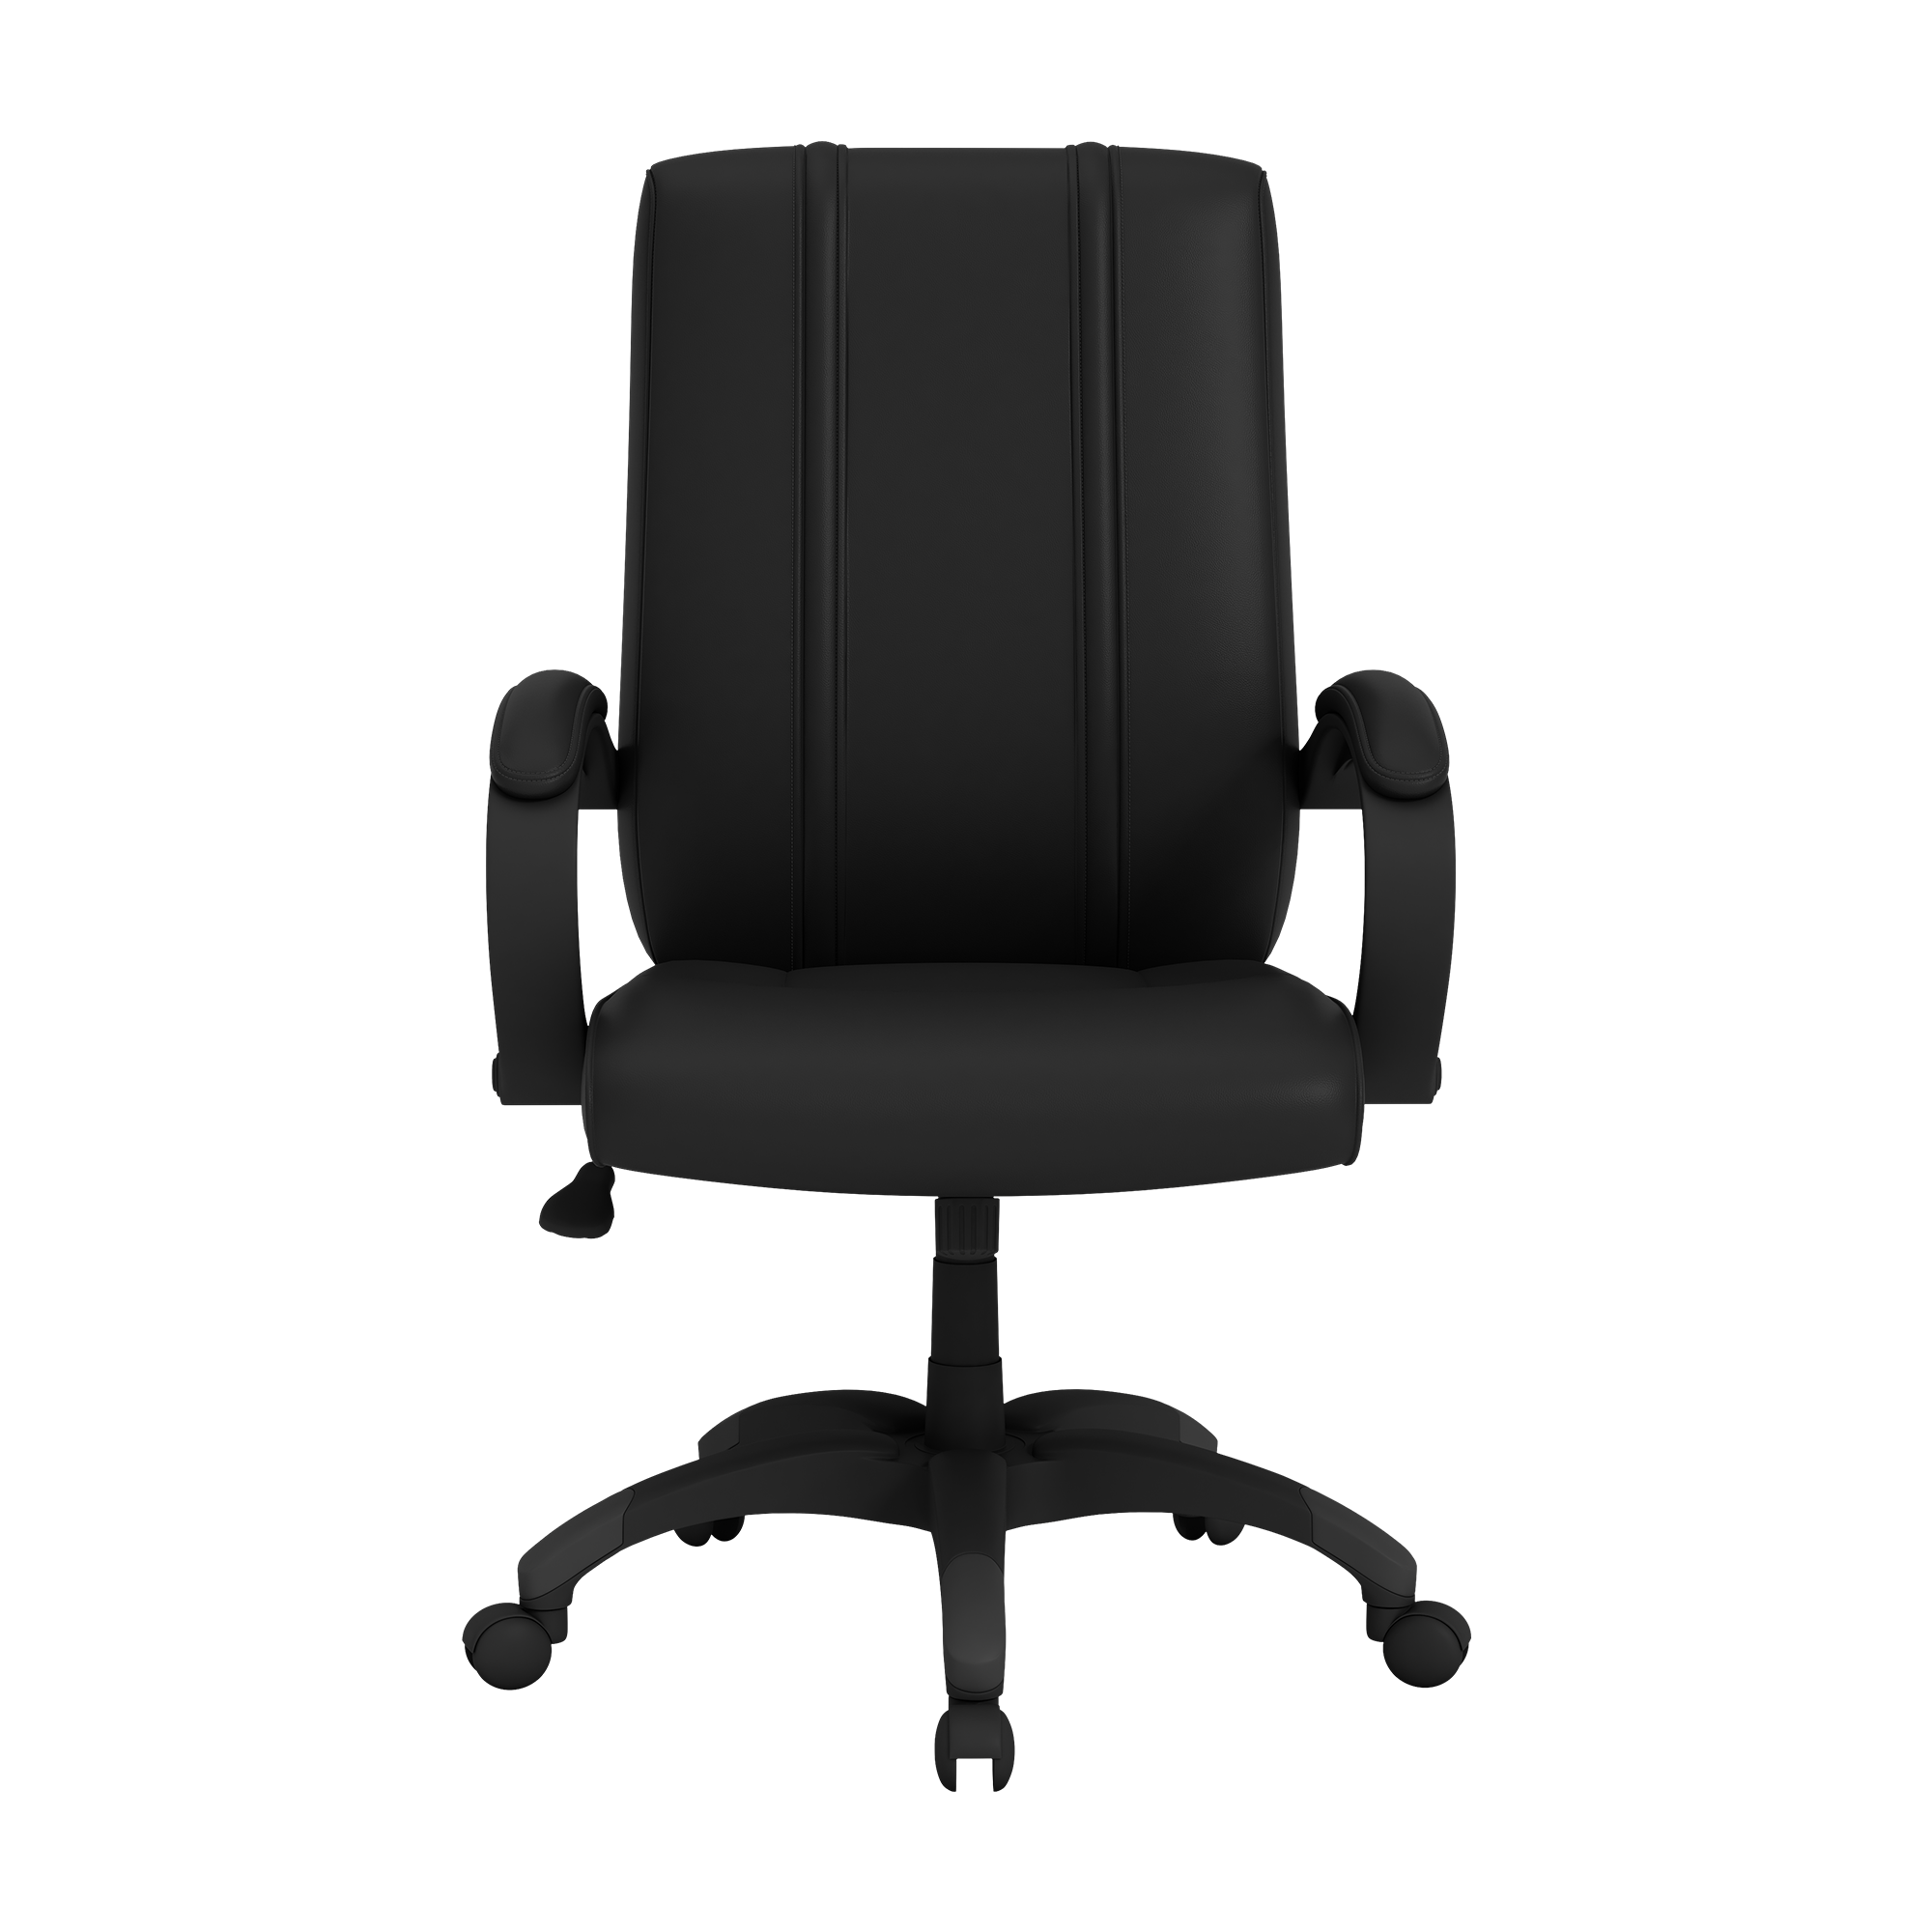 Office Chair 1000 with Chicago White Sox Cooperstown Primary